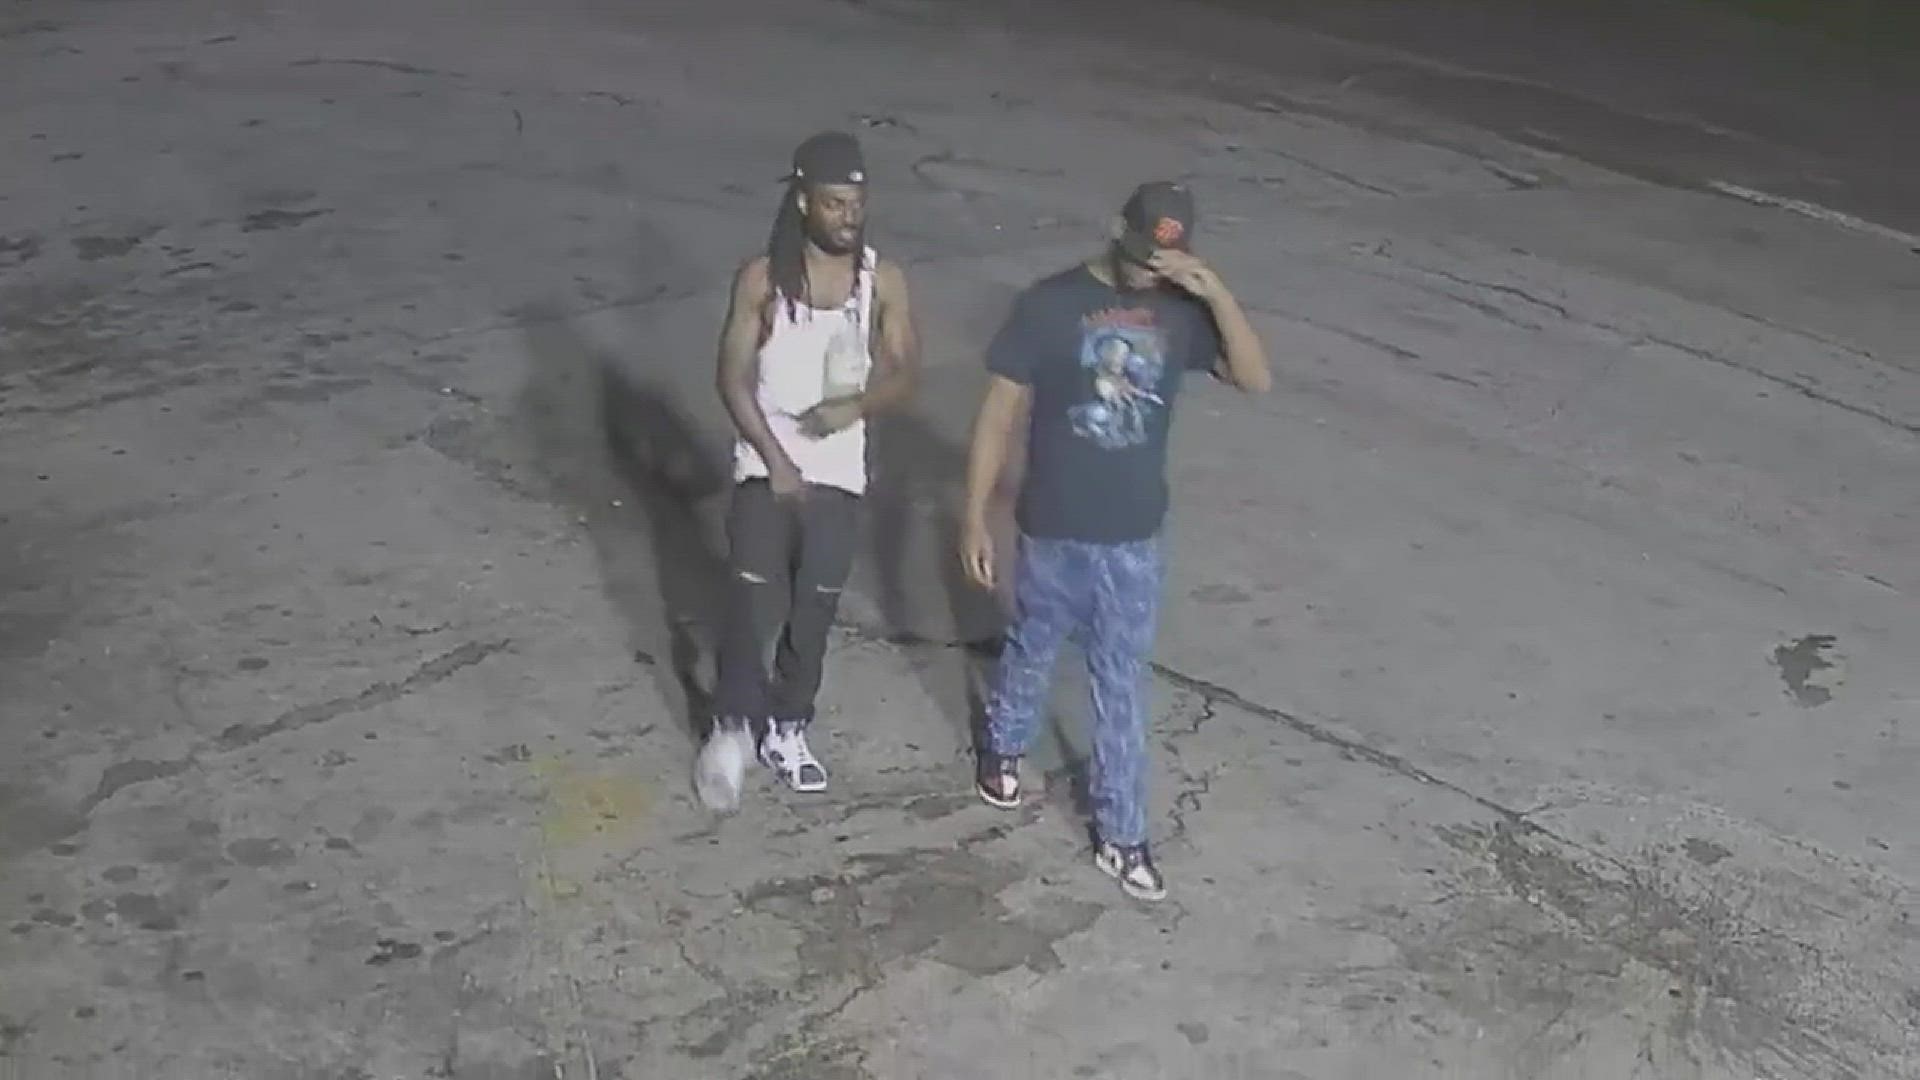 HPD is asking for the public’s help in identifying two suspects wanted for a violent aggravated robbery that happened in September at a convenience store.